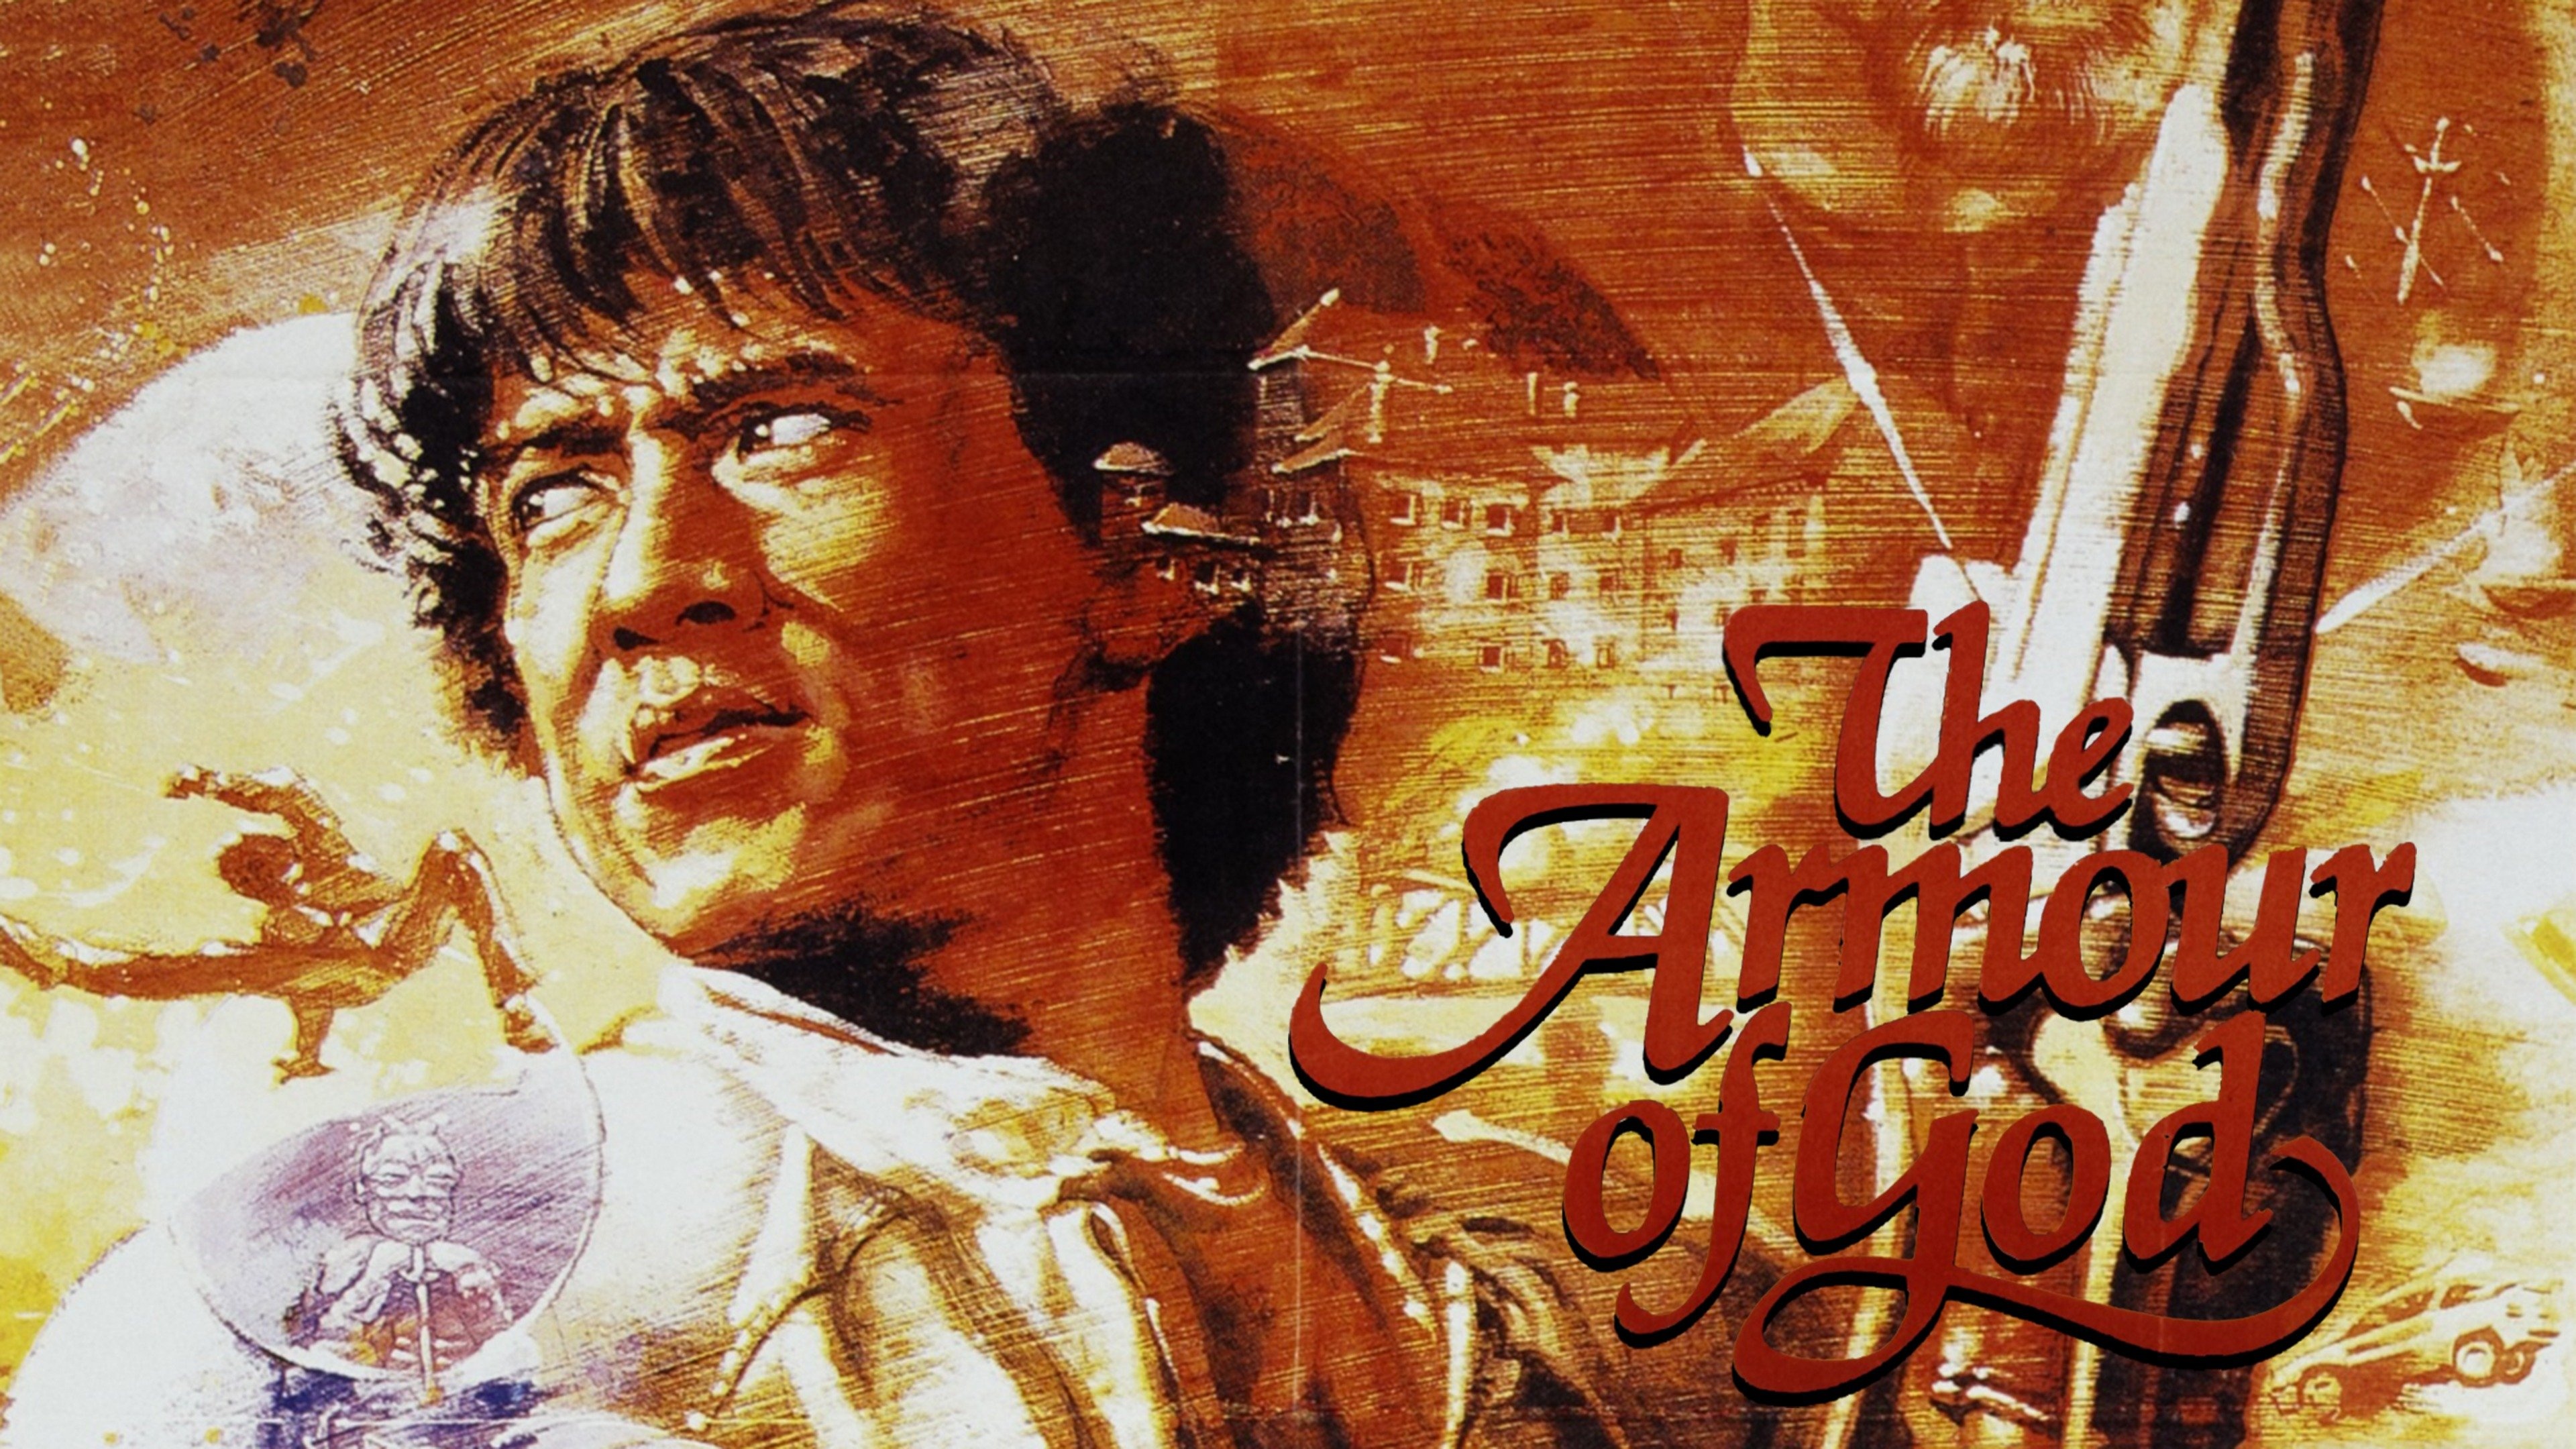 Armour of God, Online movie streaming, Thrilling plex experience, Unforgettable moments, 3840x2160 4K Desktop